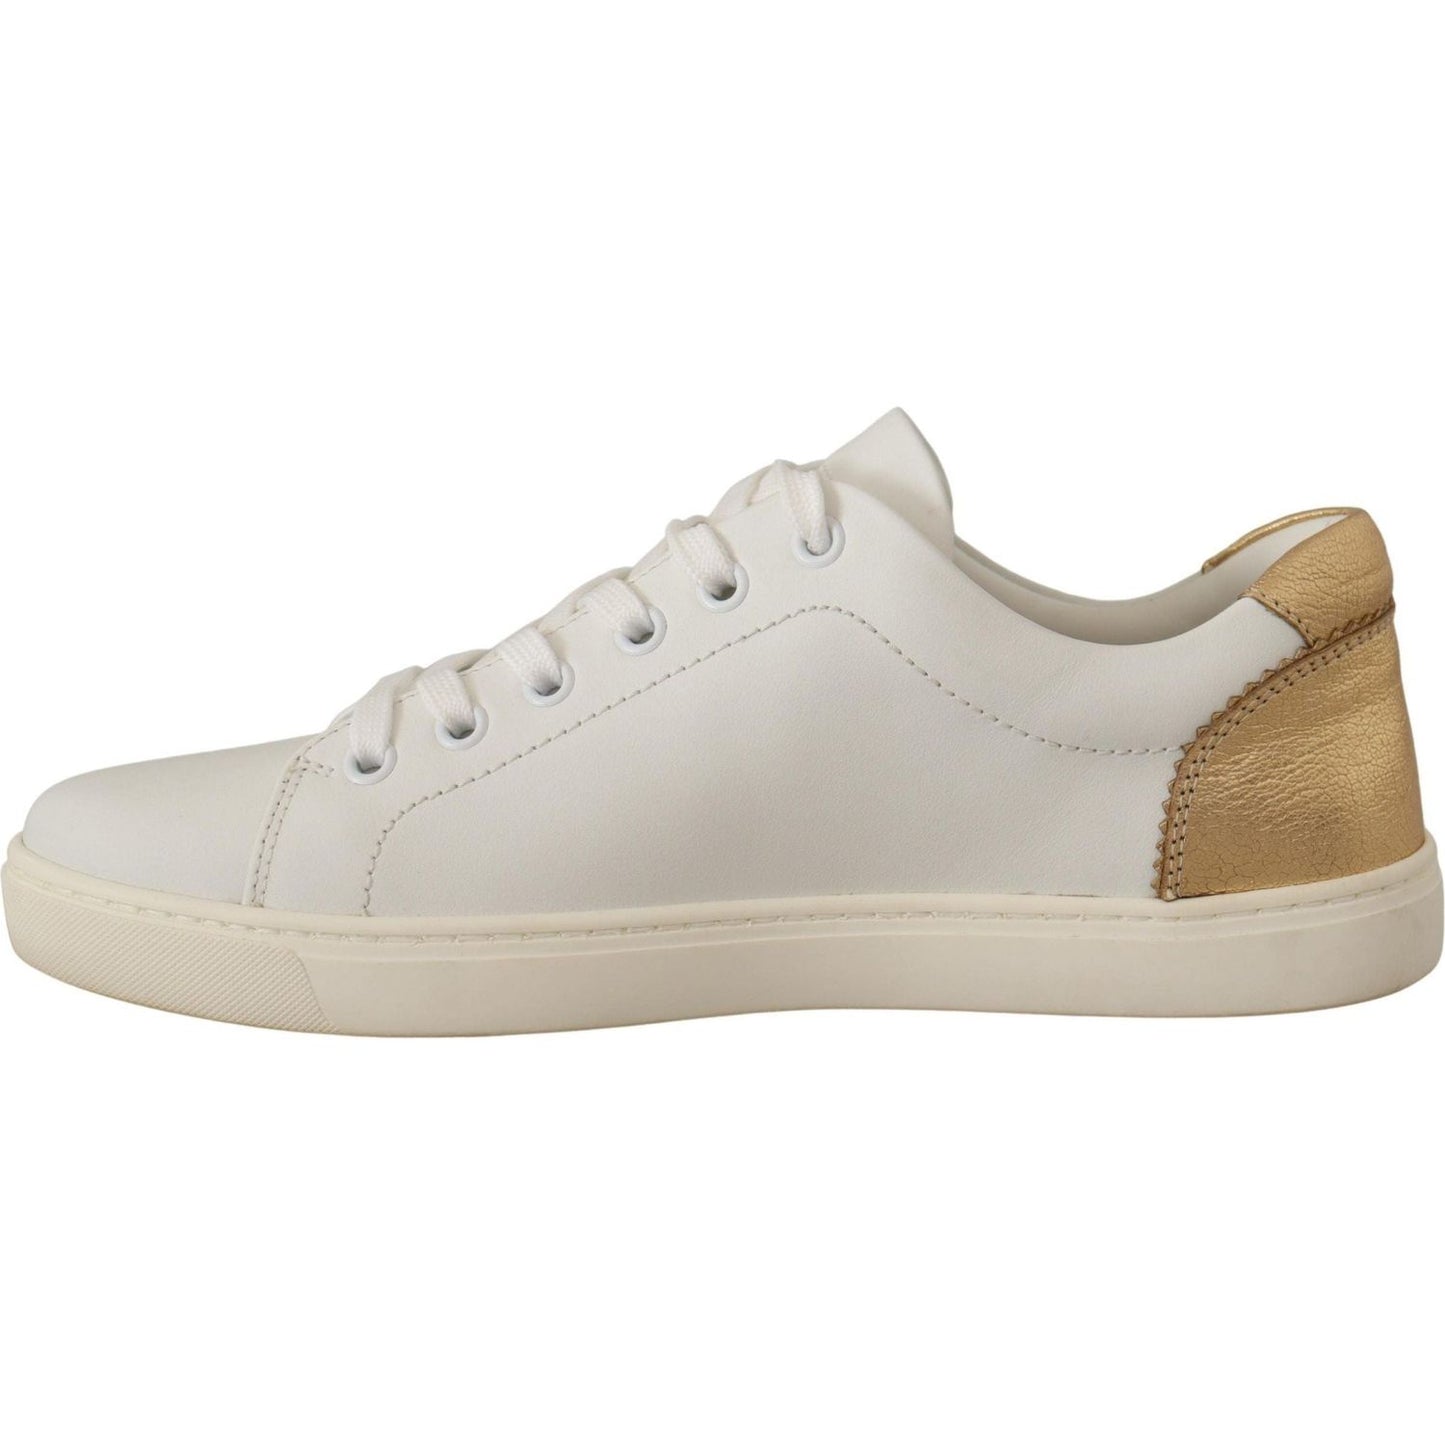 Dolce & Gabbana Elegant White Leather Sneakers with Gold Accents white-gold-leather-low-top-sneakers IMG_0492-scaled-e3dea0d3-c48.jpg